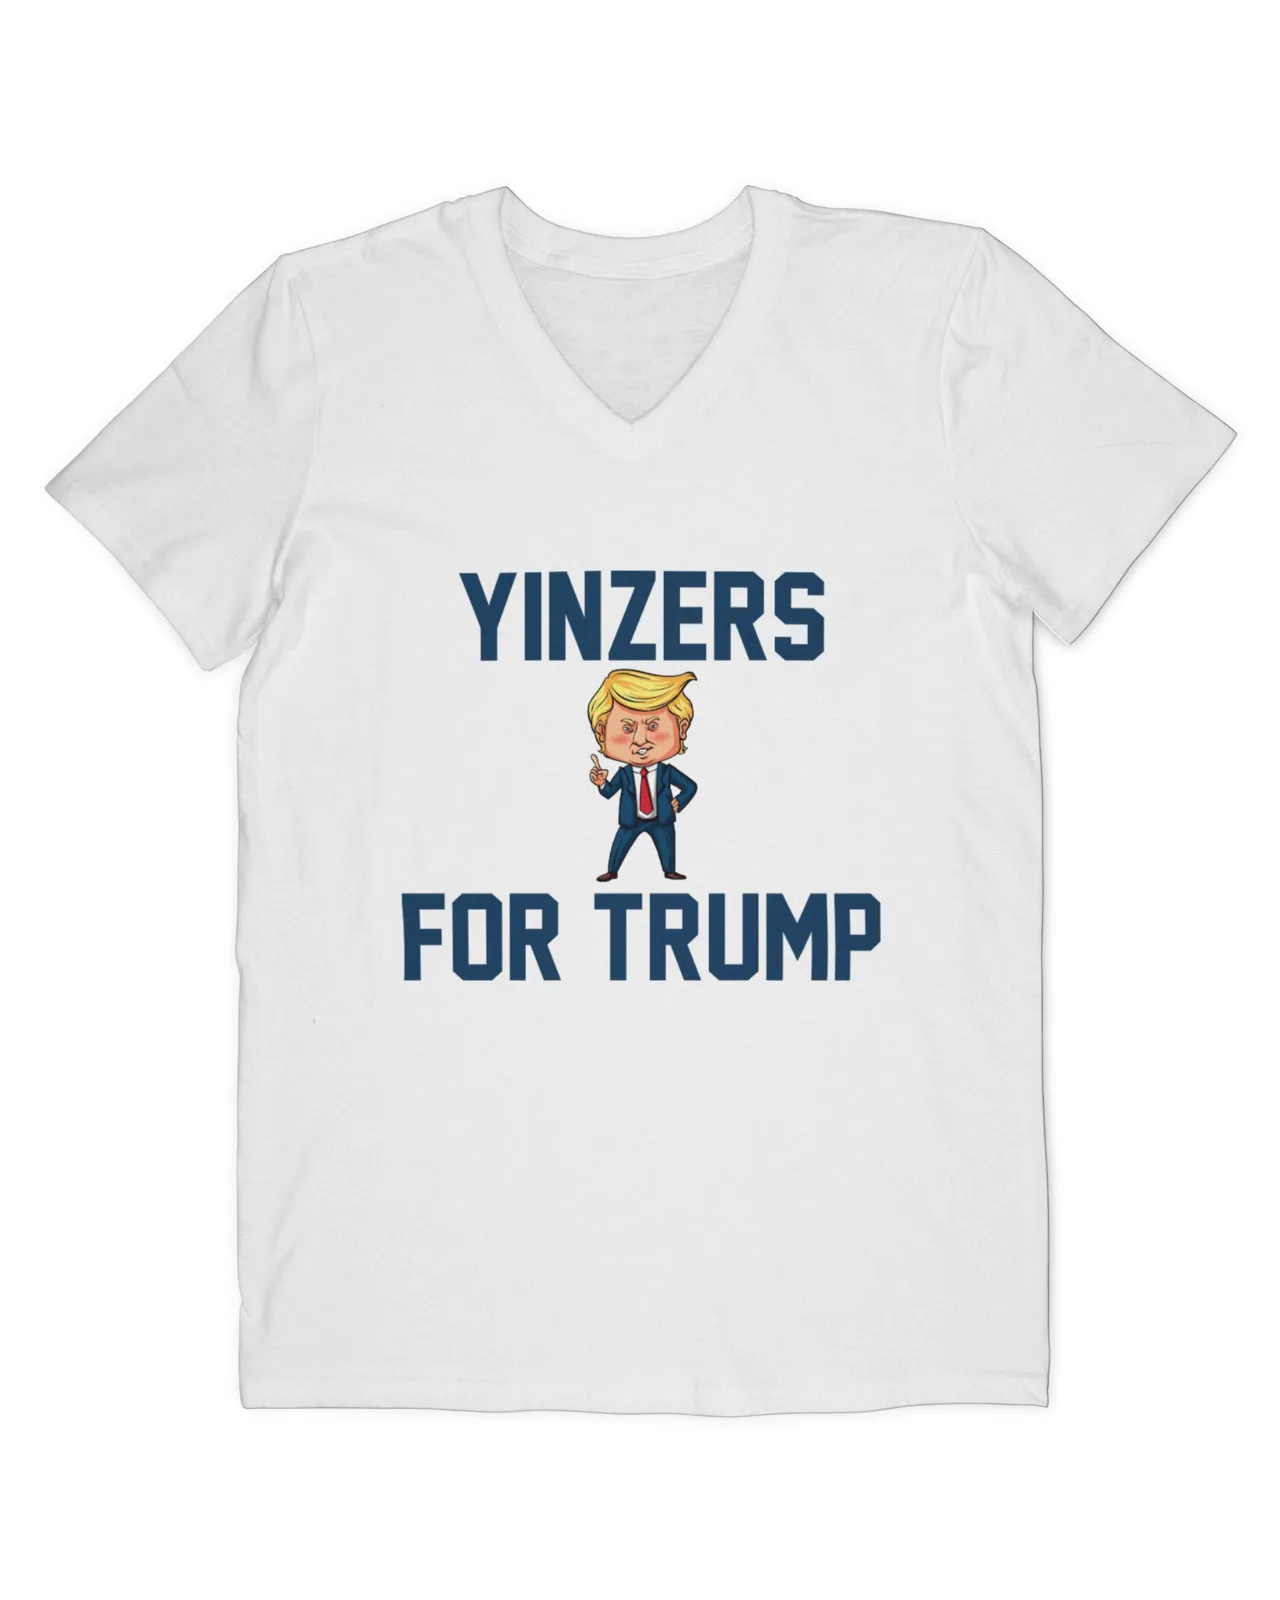 Yinzers for Trump Shirt